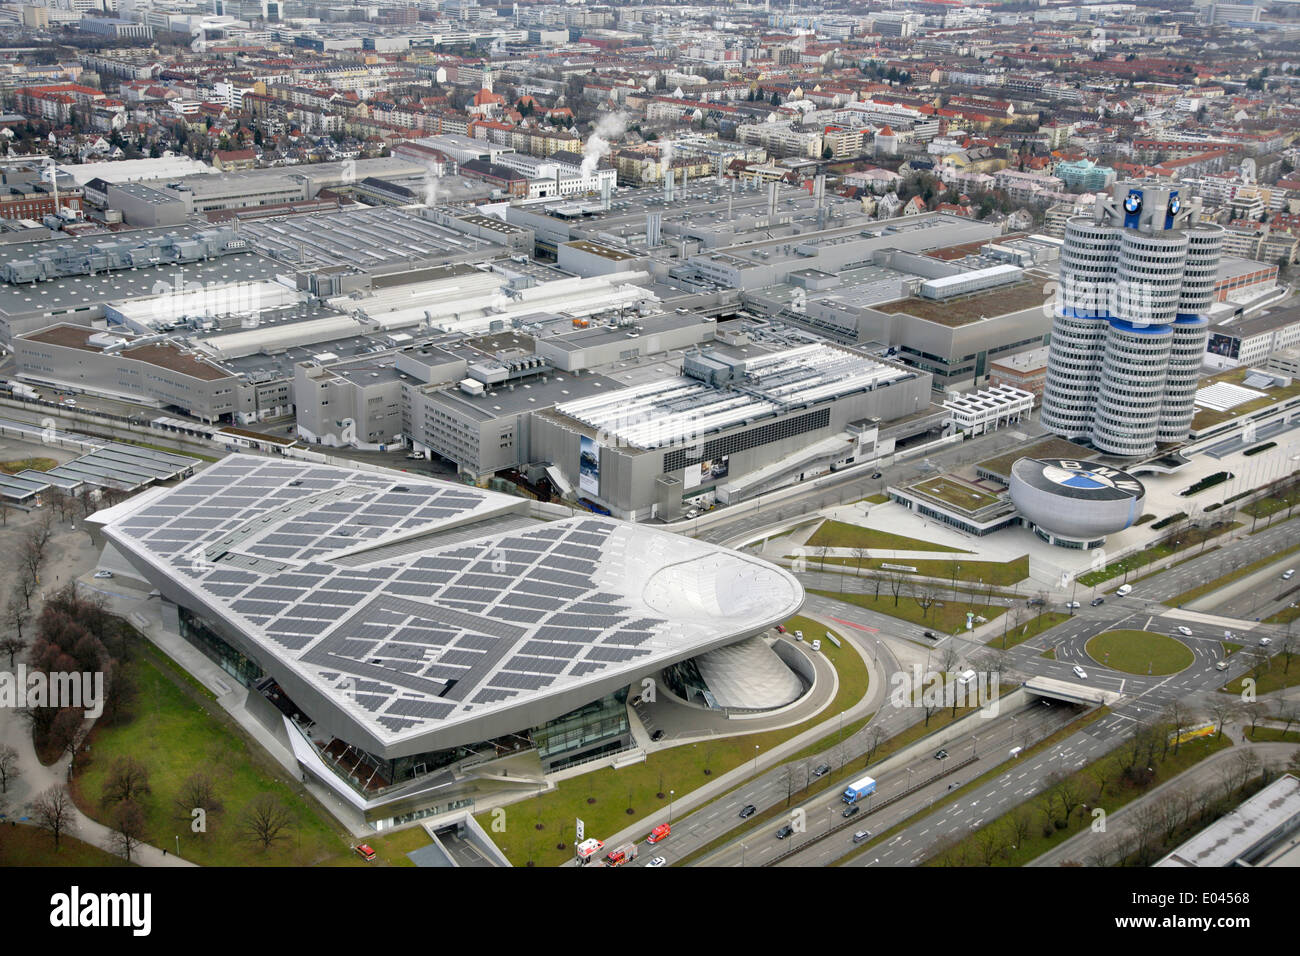 BMW-Welt or BMW World, Munich, Germany, with the BMW factory and HQ behind. Stock Photo